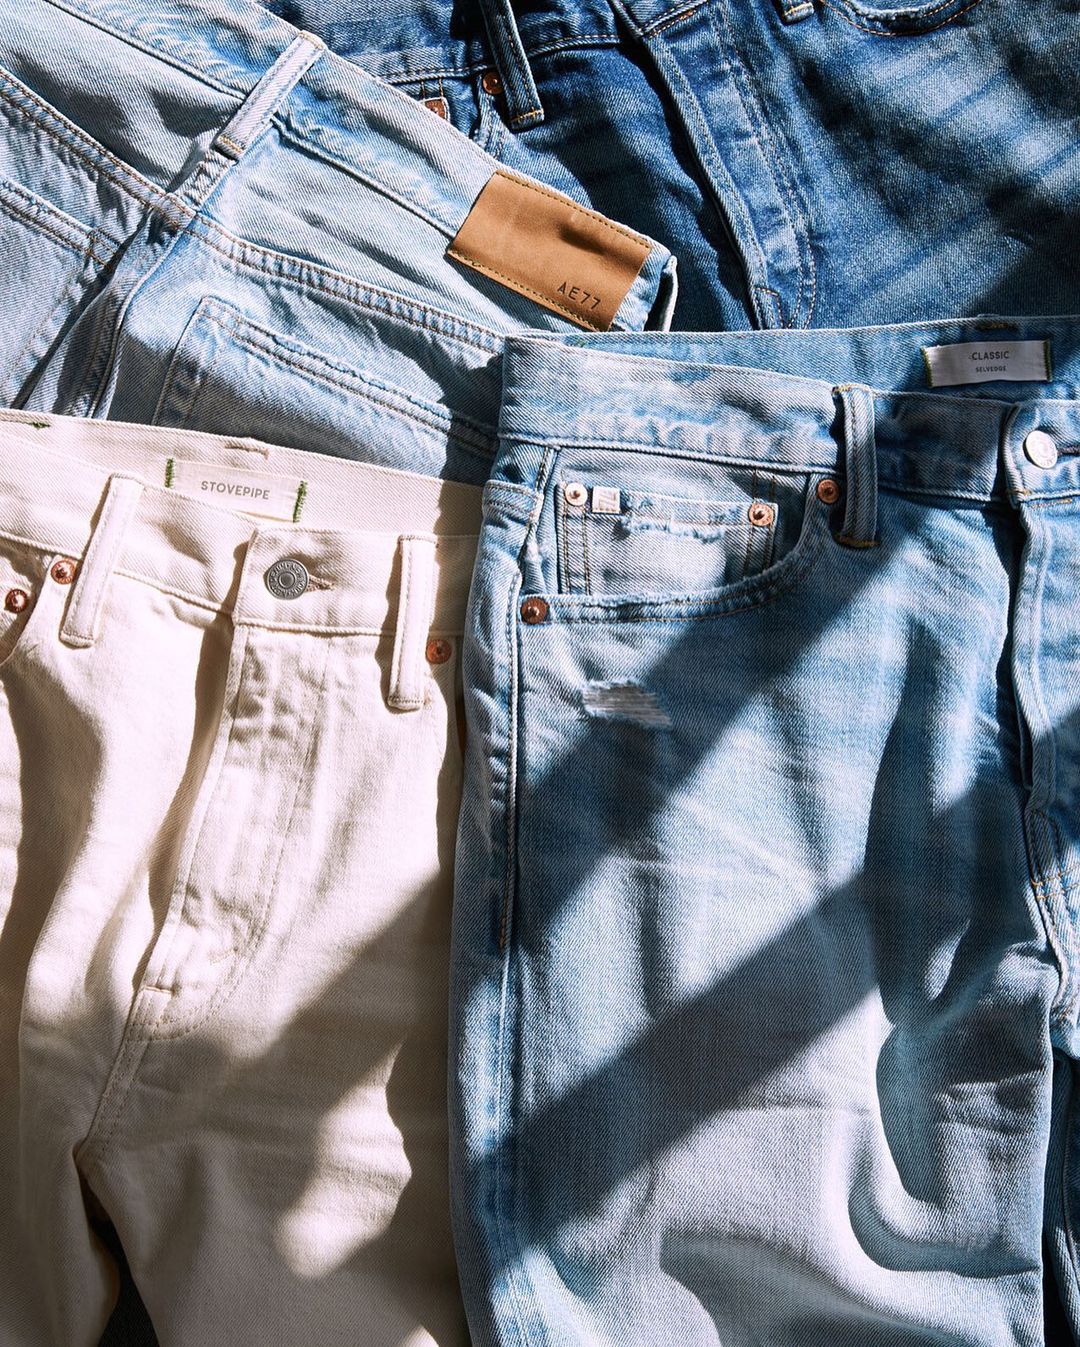 Brightly lit flat lay of jeans stacked on top of each other. On the left are blue and white jeans and on the right are two other blue jeans. A ray of shadows accents the photo.